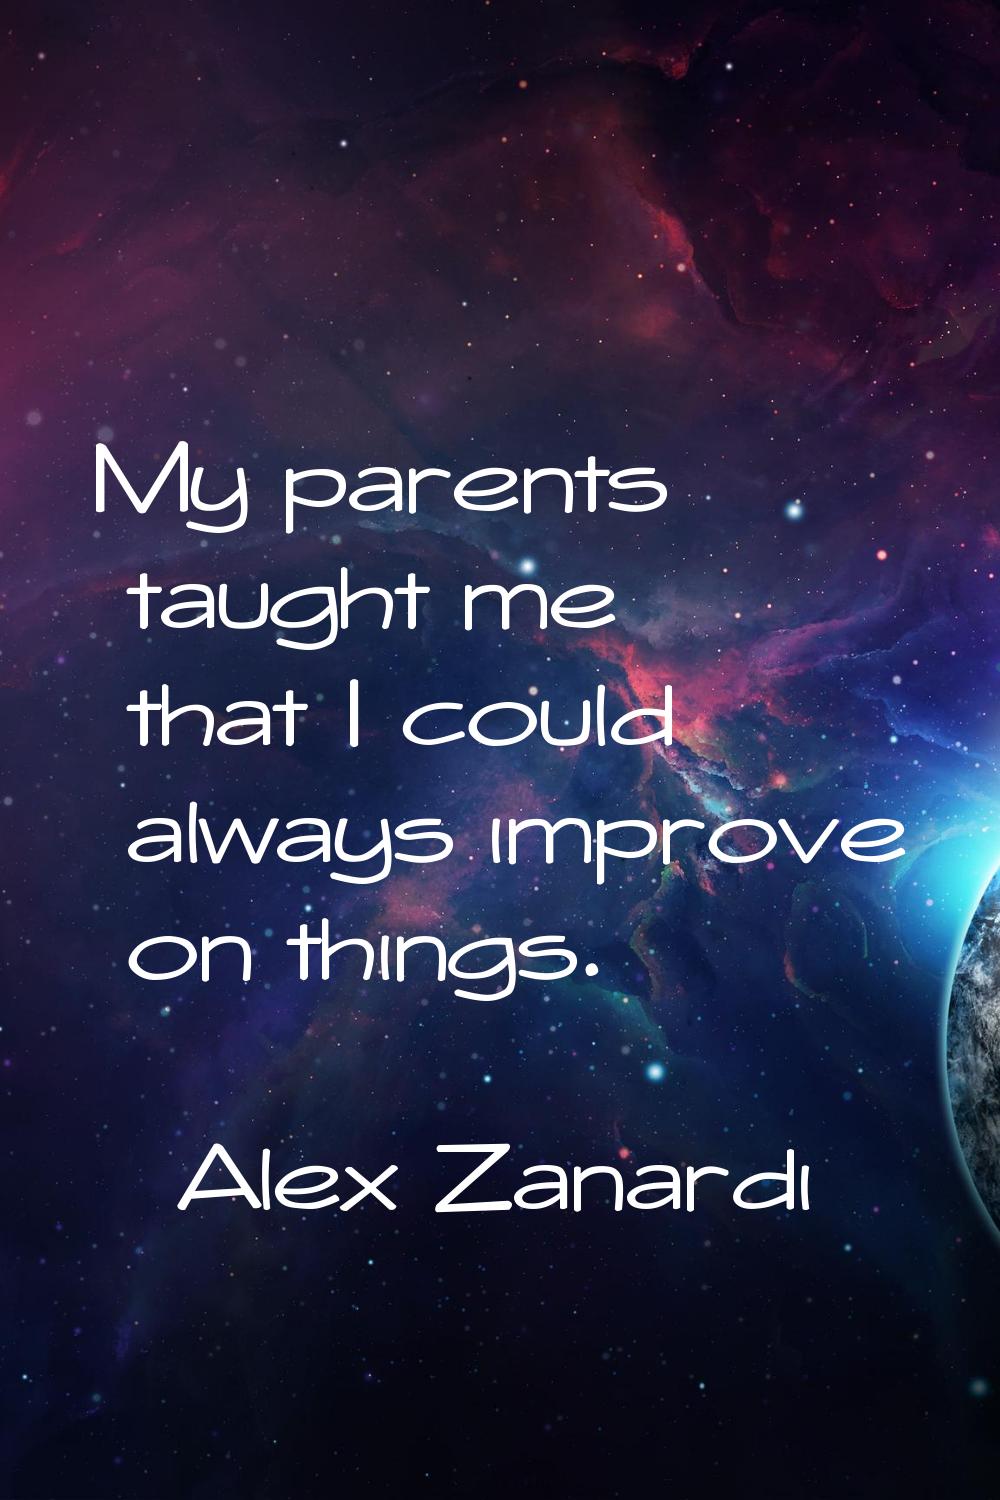 My parents taught me that I could always improve on things.